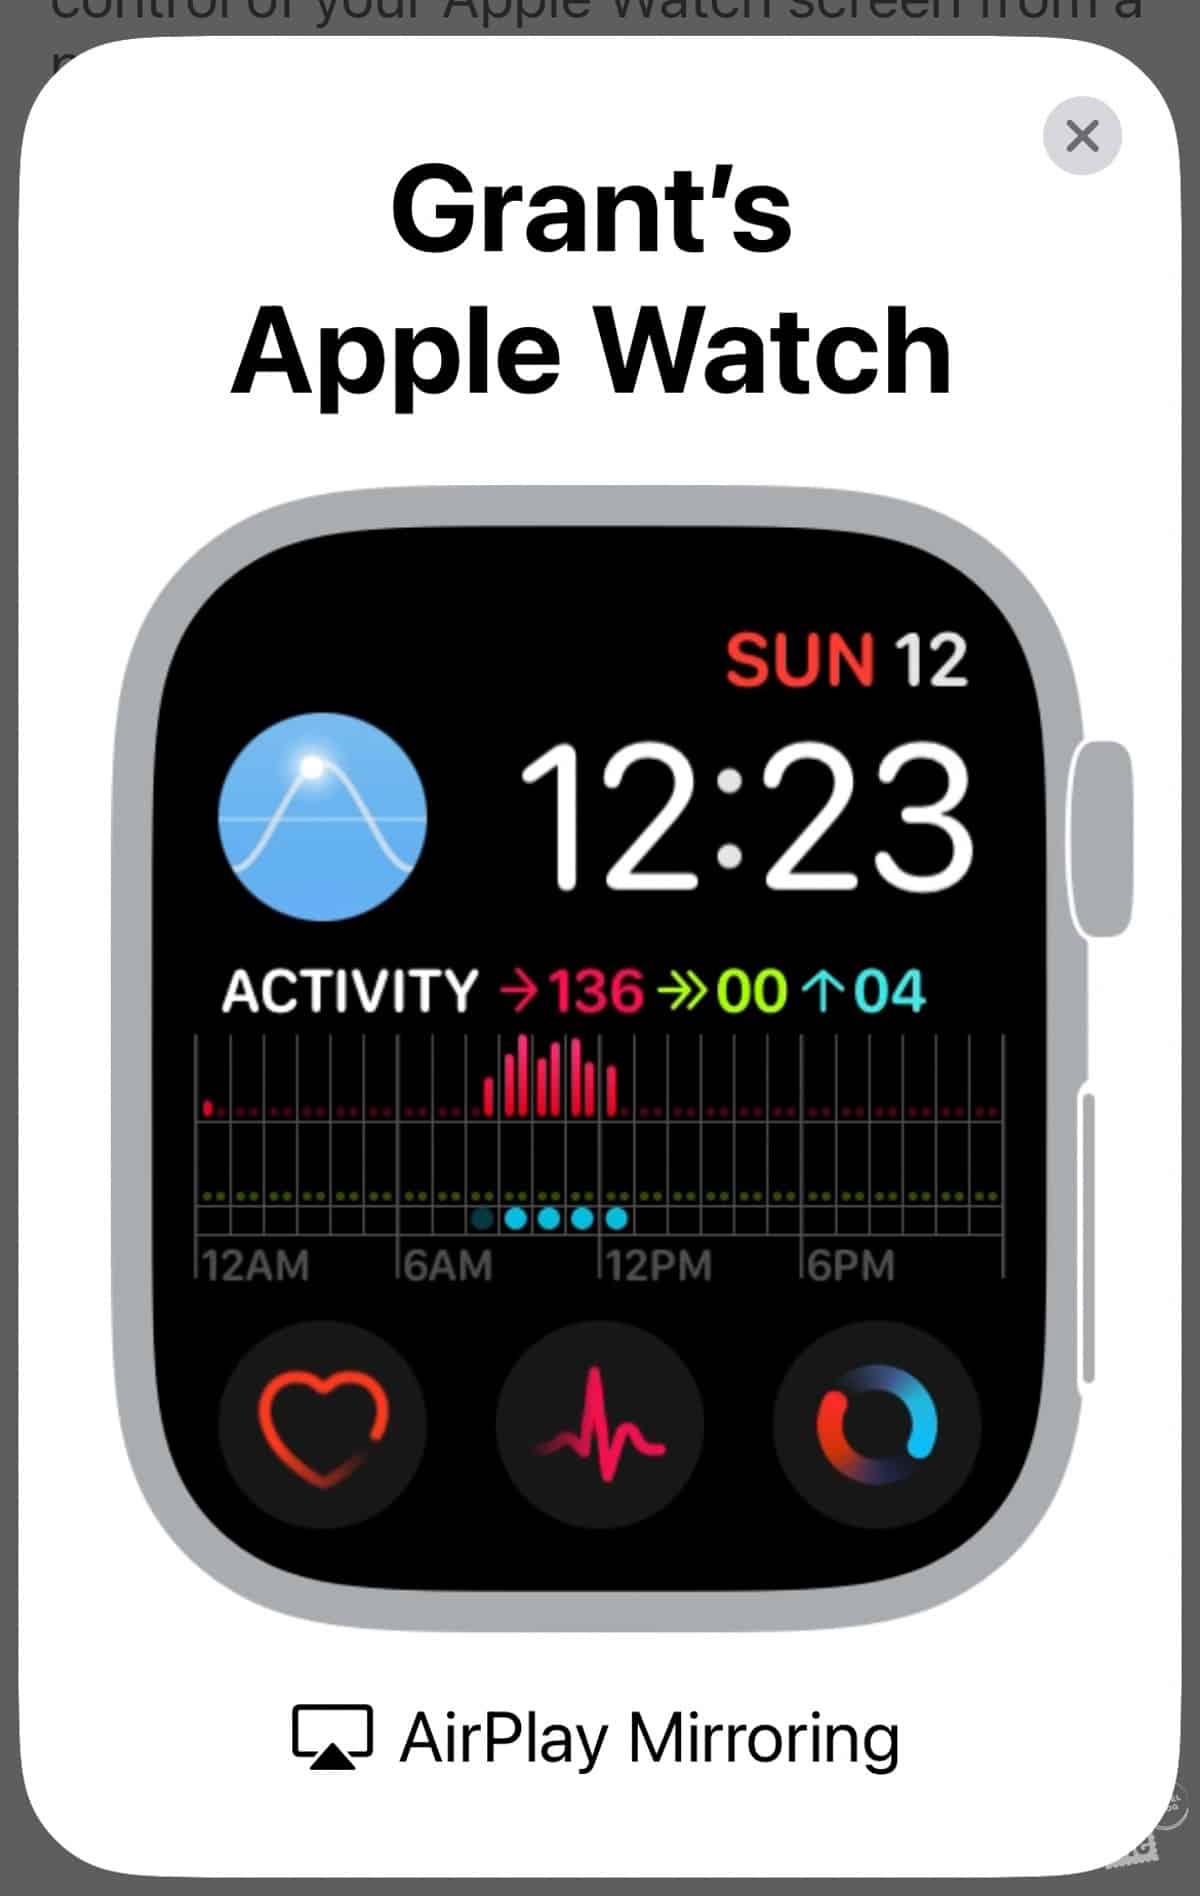 Grant's Heart Face on his Apple Watch